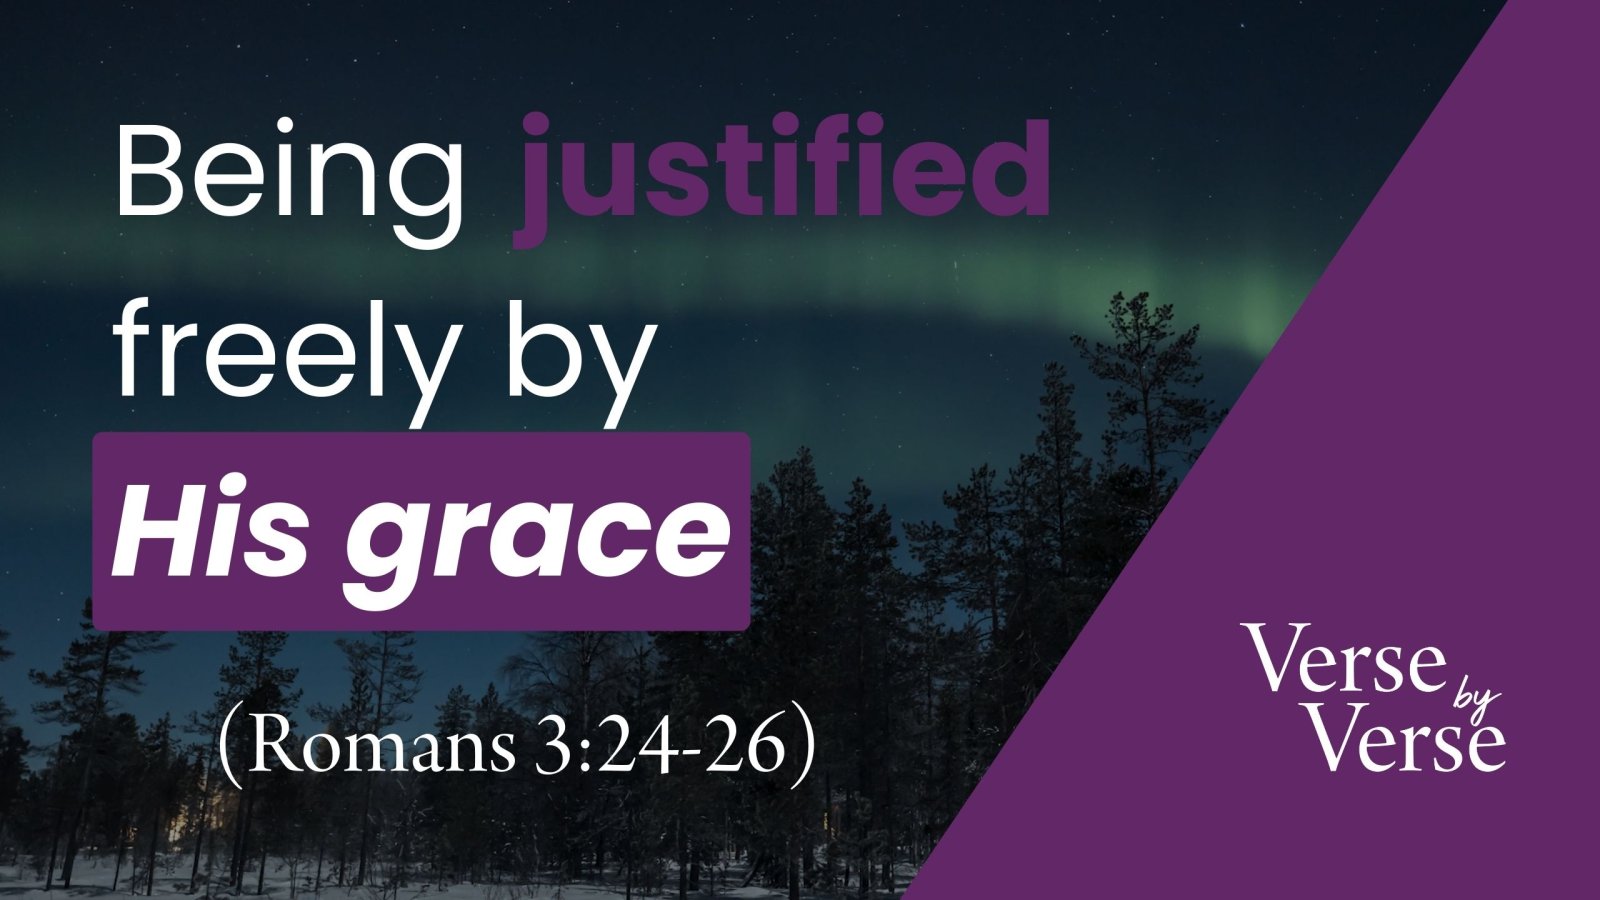 DEEP DIVE: Being Justified Freely by His Grace (Romans 3:24-26)